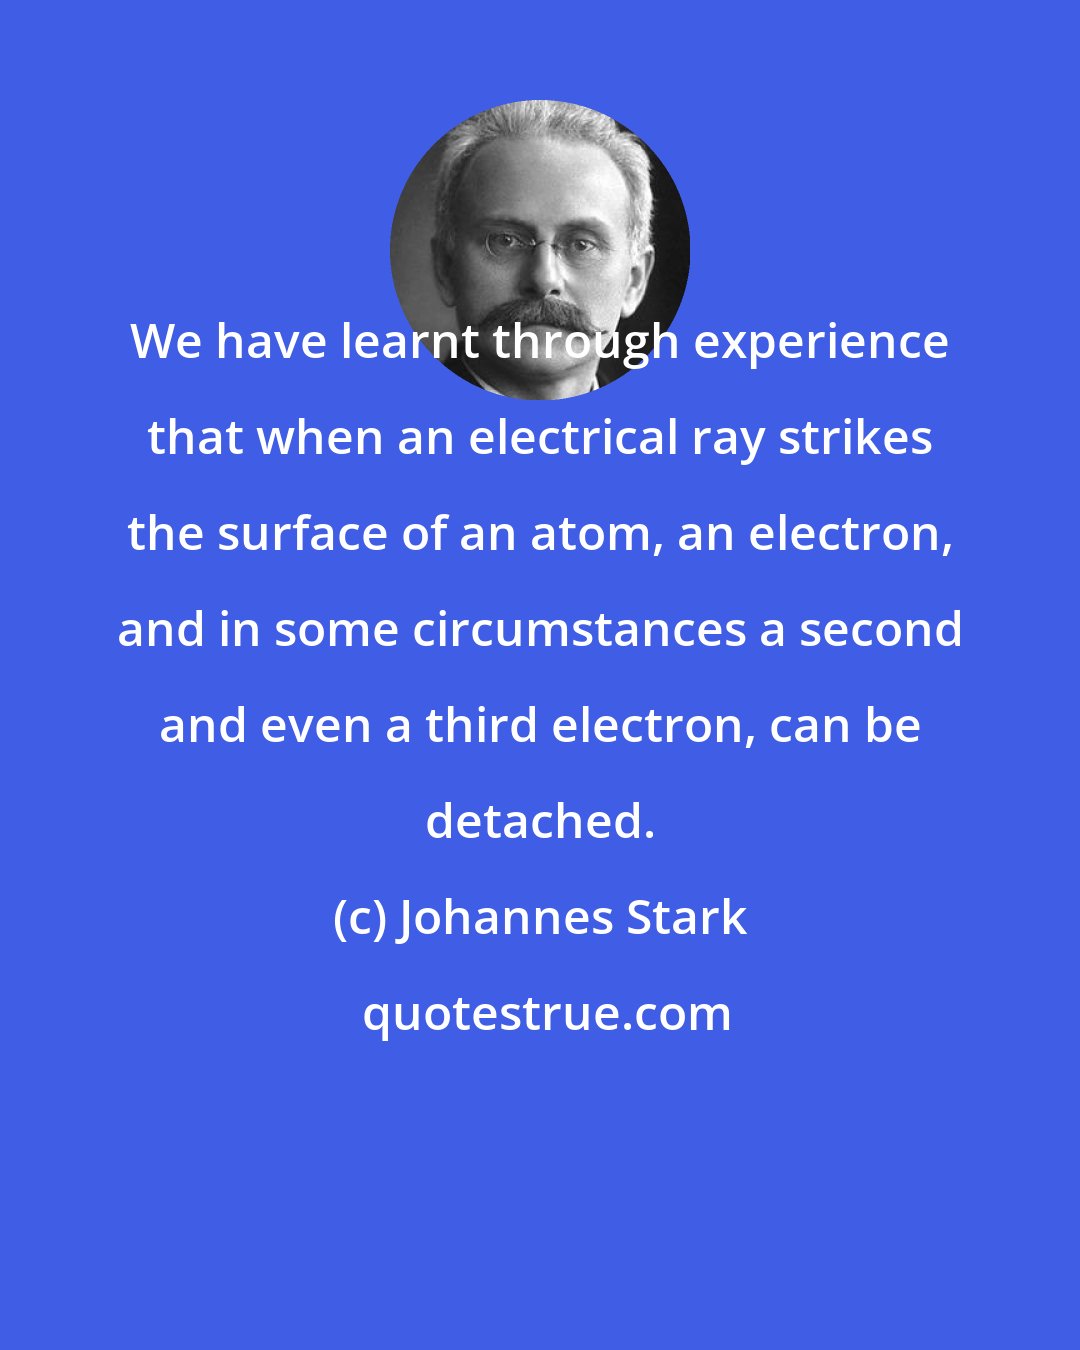 Johannes Stark: We have learnt through experience that when an electrical ray strikes the surface of an atom, an electron, and in some circumstances a second and even a third electron, can be detached.